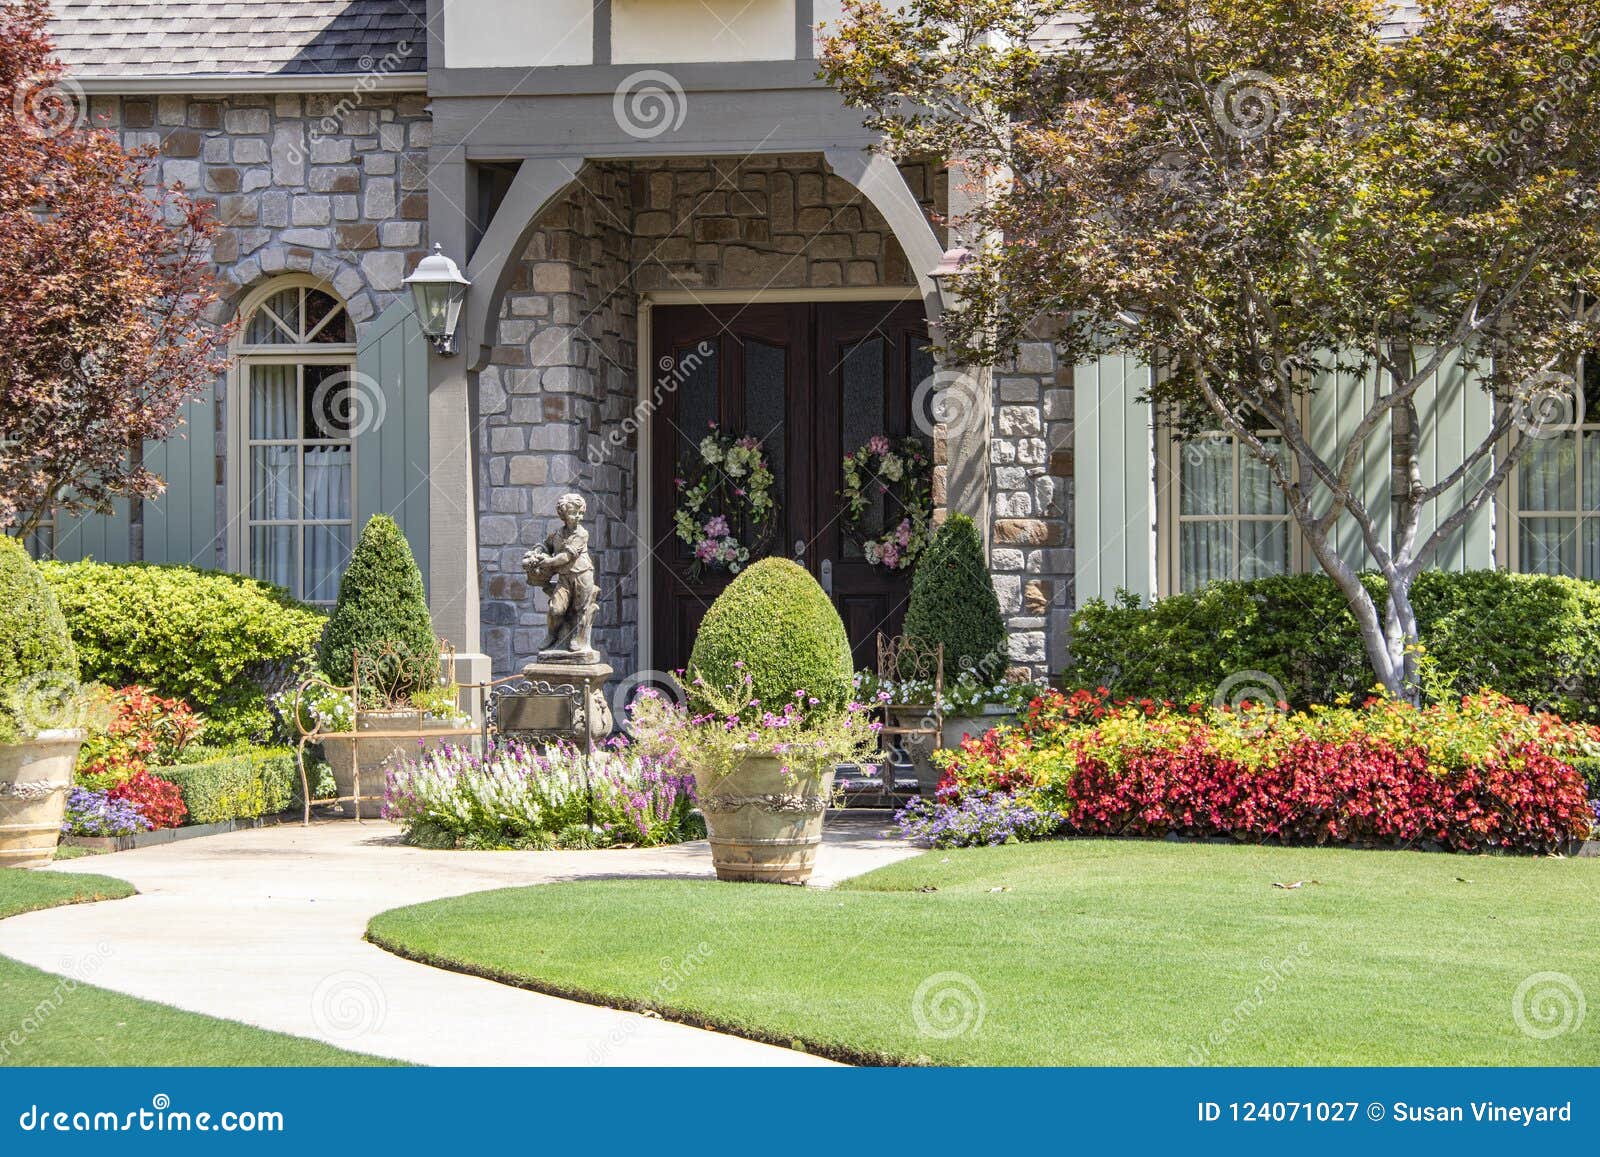 Entrance To Upscale Rock House With Beautiful Landscaping And A